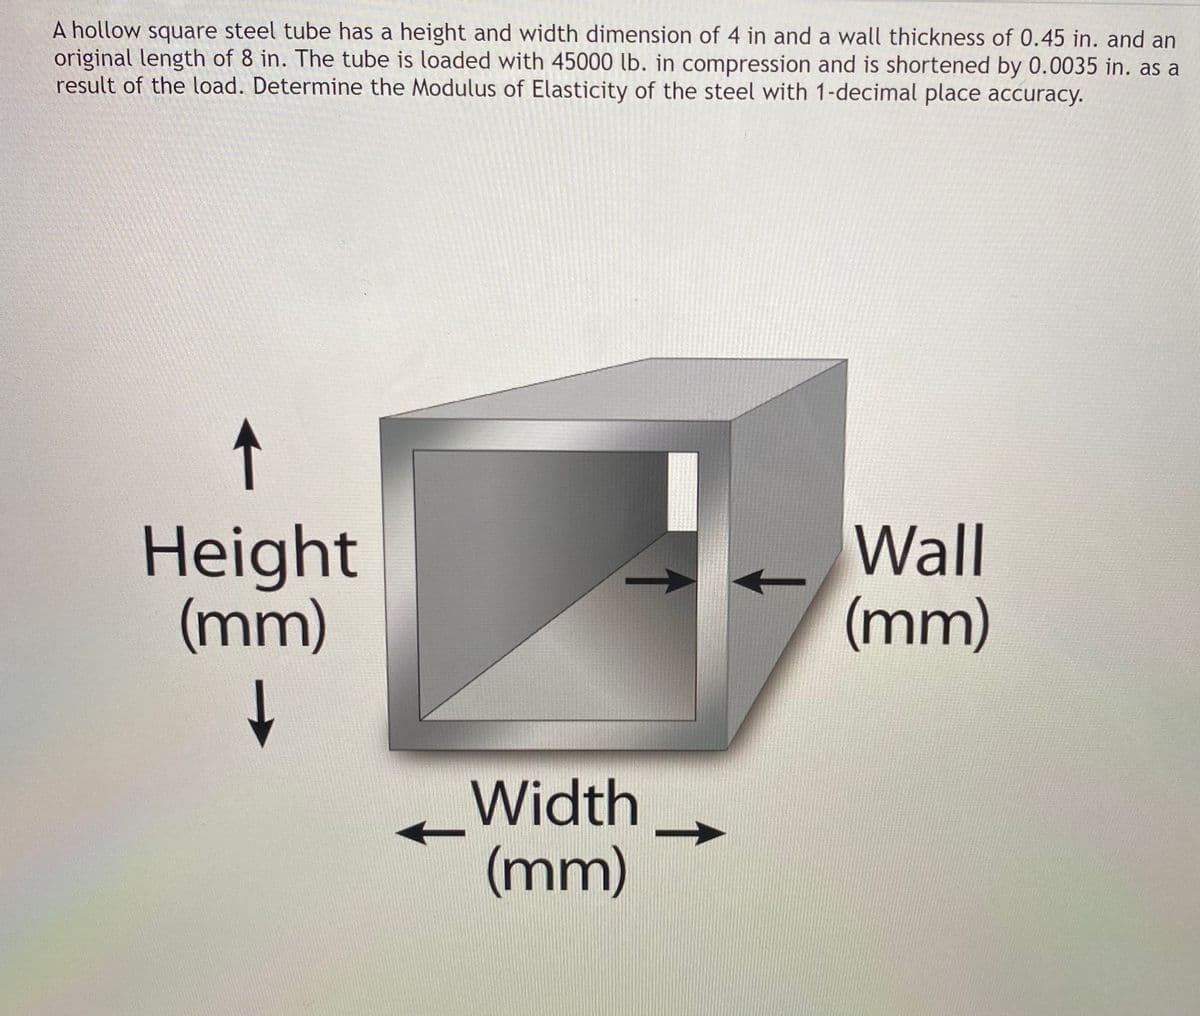 A hollow square steel tube has a height and width dimension of 4 in and a wall thickness of 0.45 in. and an
original length of 8 in. The tube is loaded with 45000 lb. in compression and is shortened by 0.0035 in. as a
result of the load. Determine the Modulus of Elasticity of the steel with 1-decimal place accuracy.
↑
Height
(mm)
Wall
(mm)
Width
(mm)
